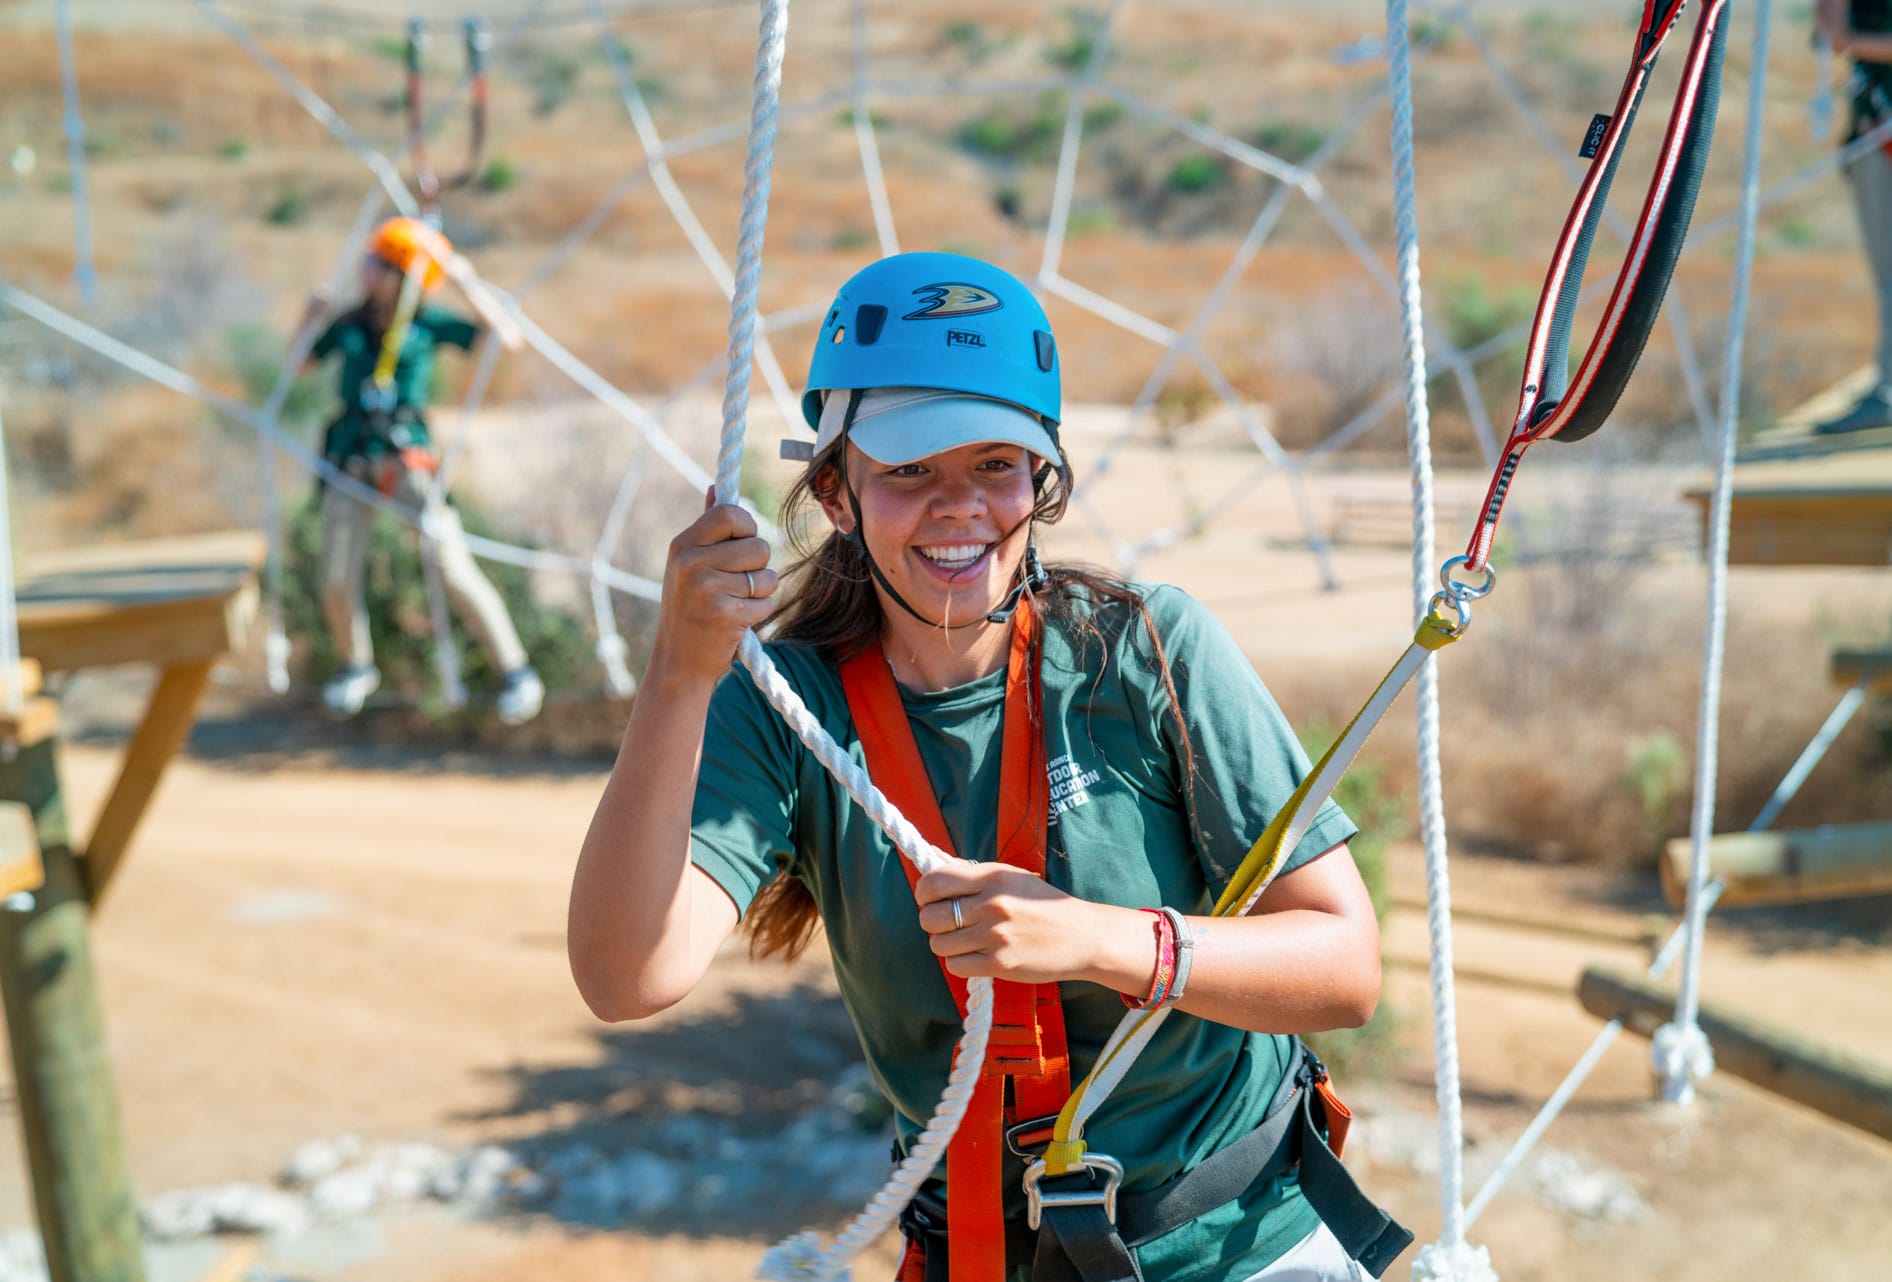 Woman on the spider web section of the Adventure Hill challenge course